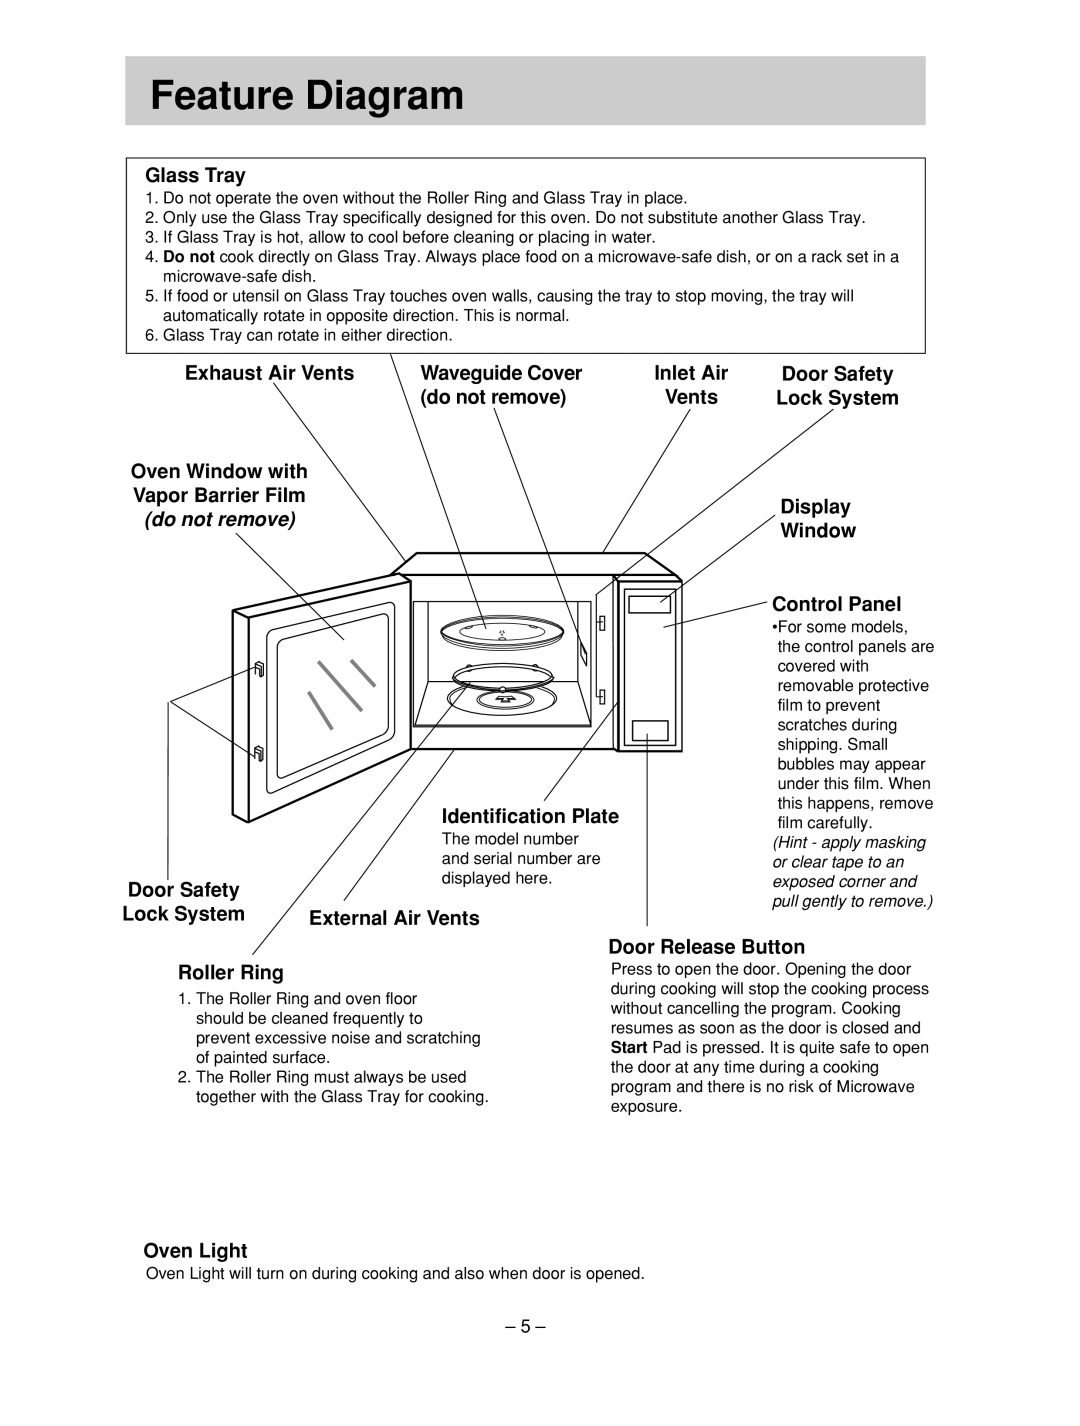 Panasonic NN-ST657S Feature Diagram, Glass Tray, Exhaust Air Vents, Waveguide Cover, Inlet Air, do not remove, Lock System 